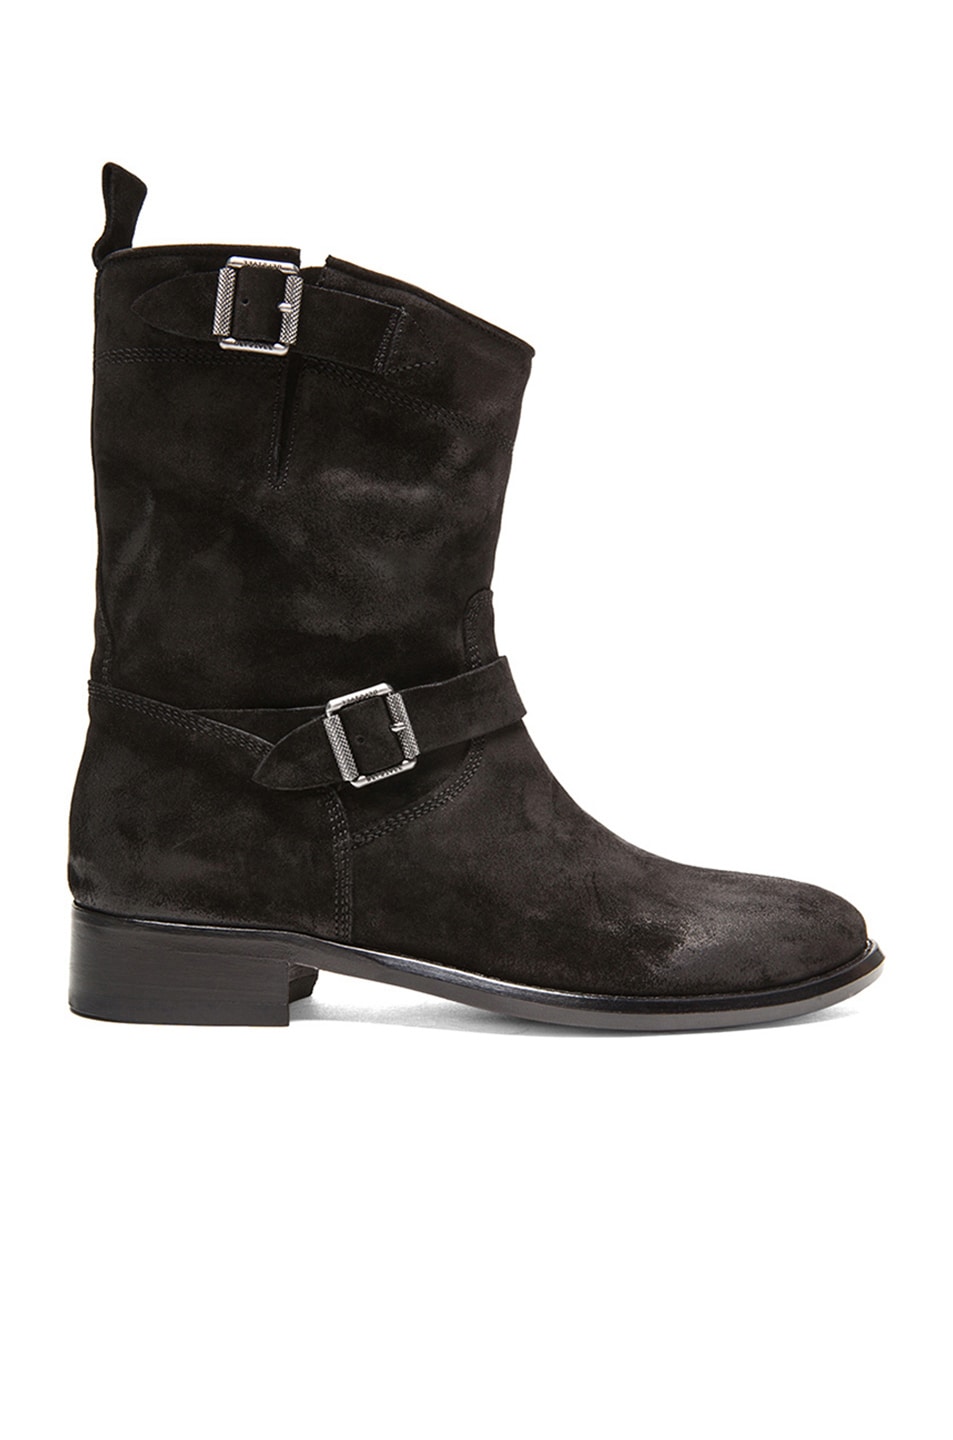 Image 1 of Belstaff Bedford Boots in Black Waxed Suede